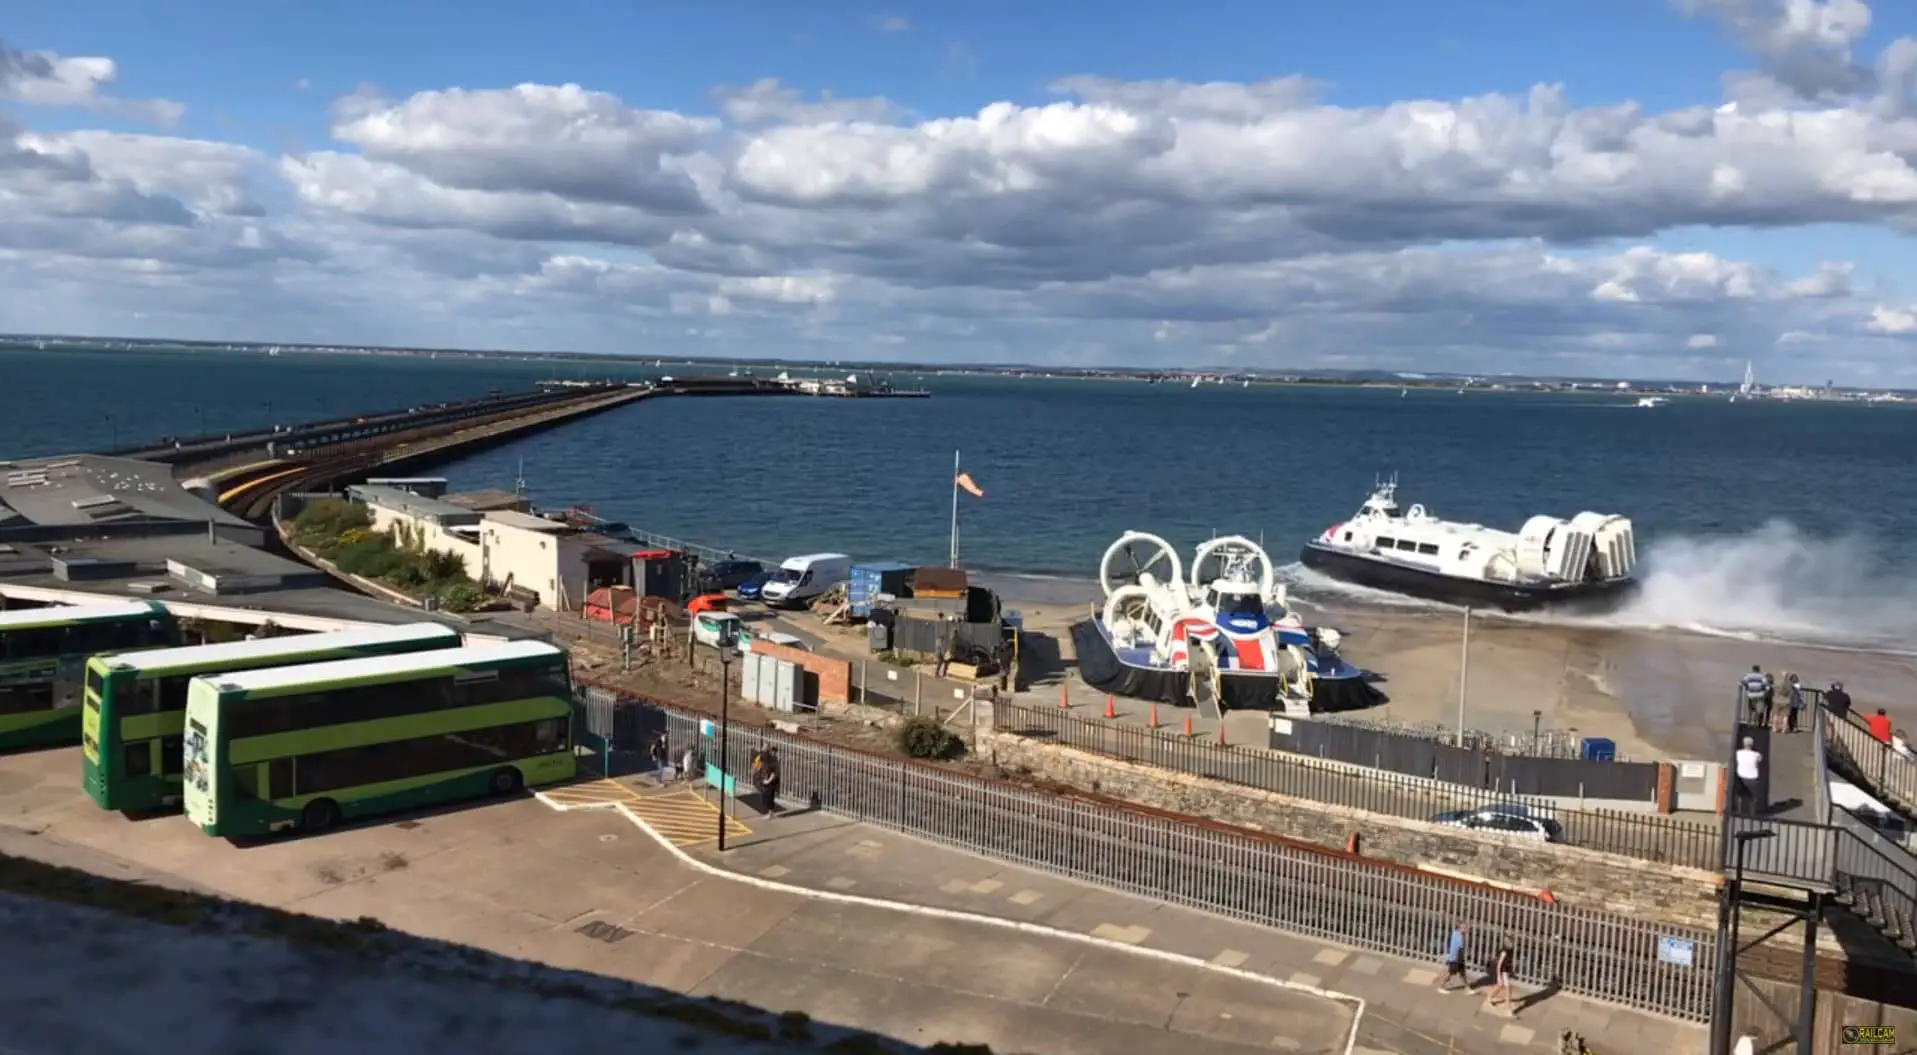 Railcam in Ryde showing two Hovercraft and three buses